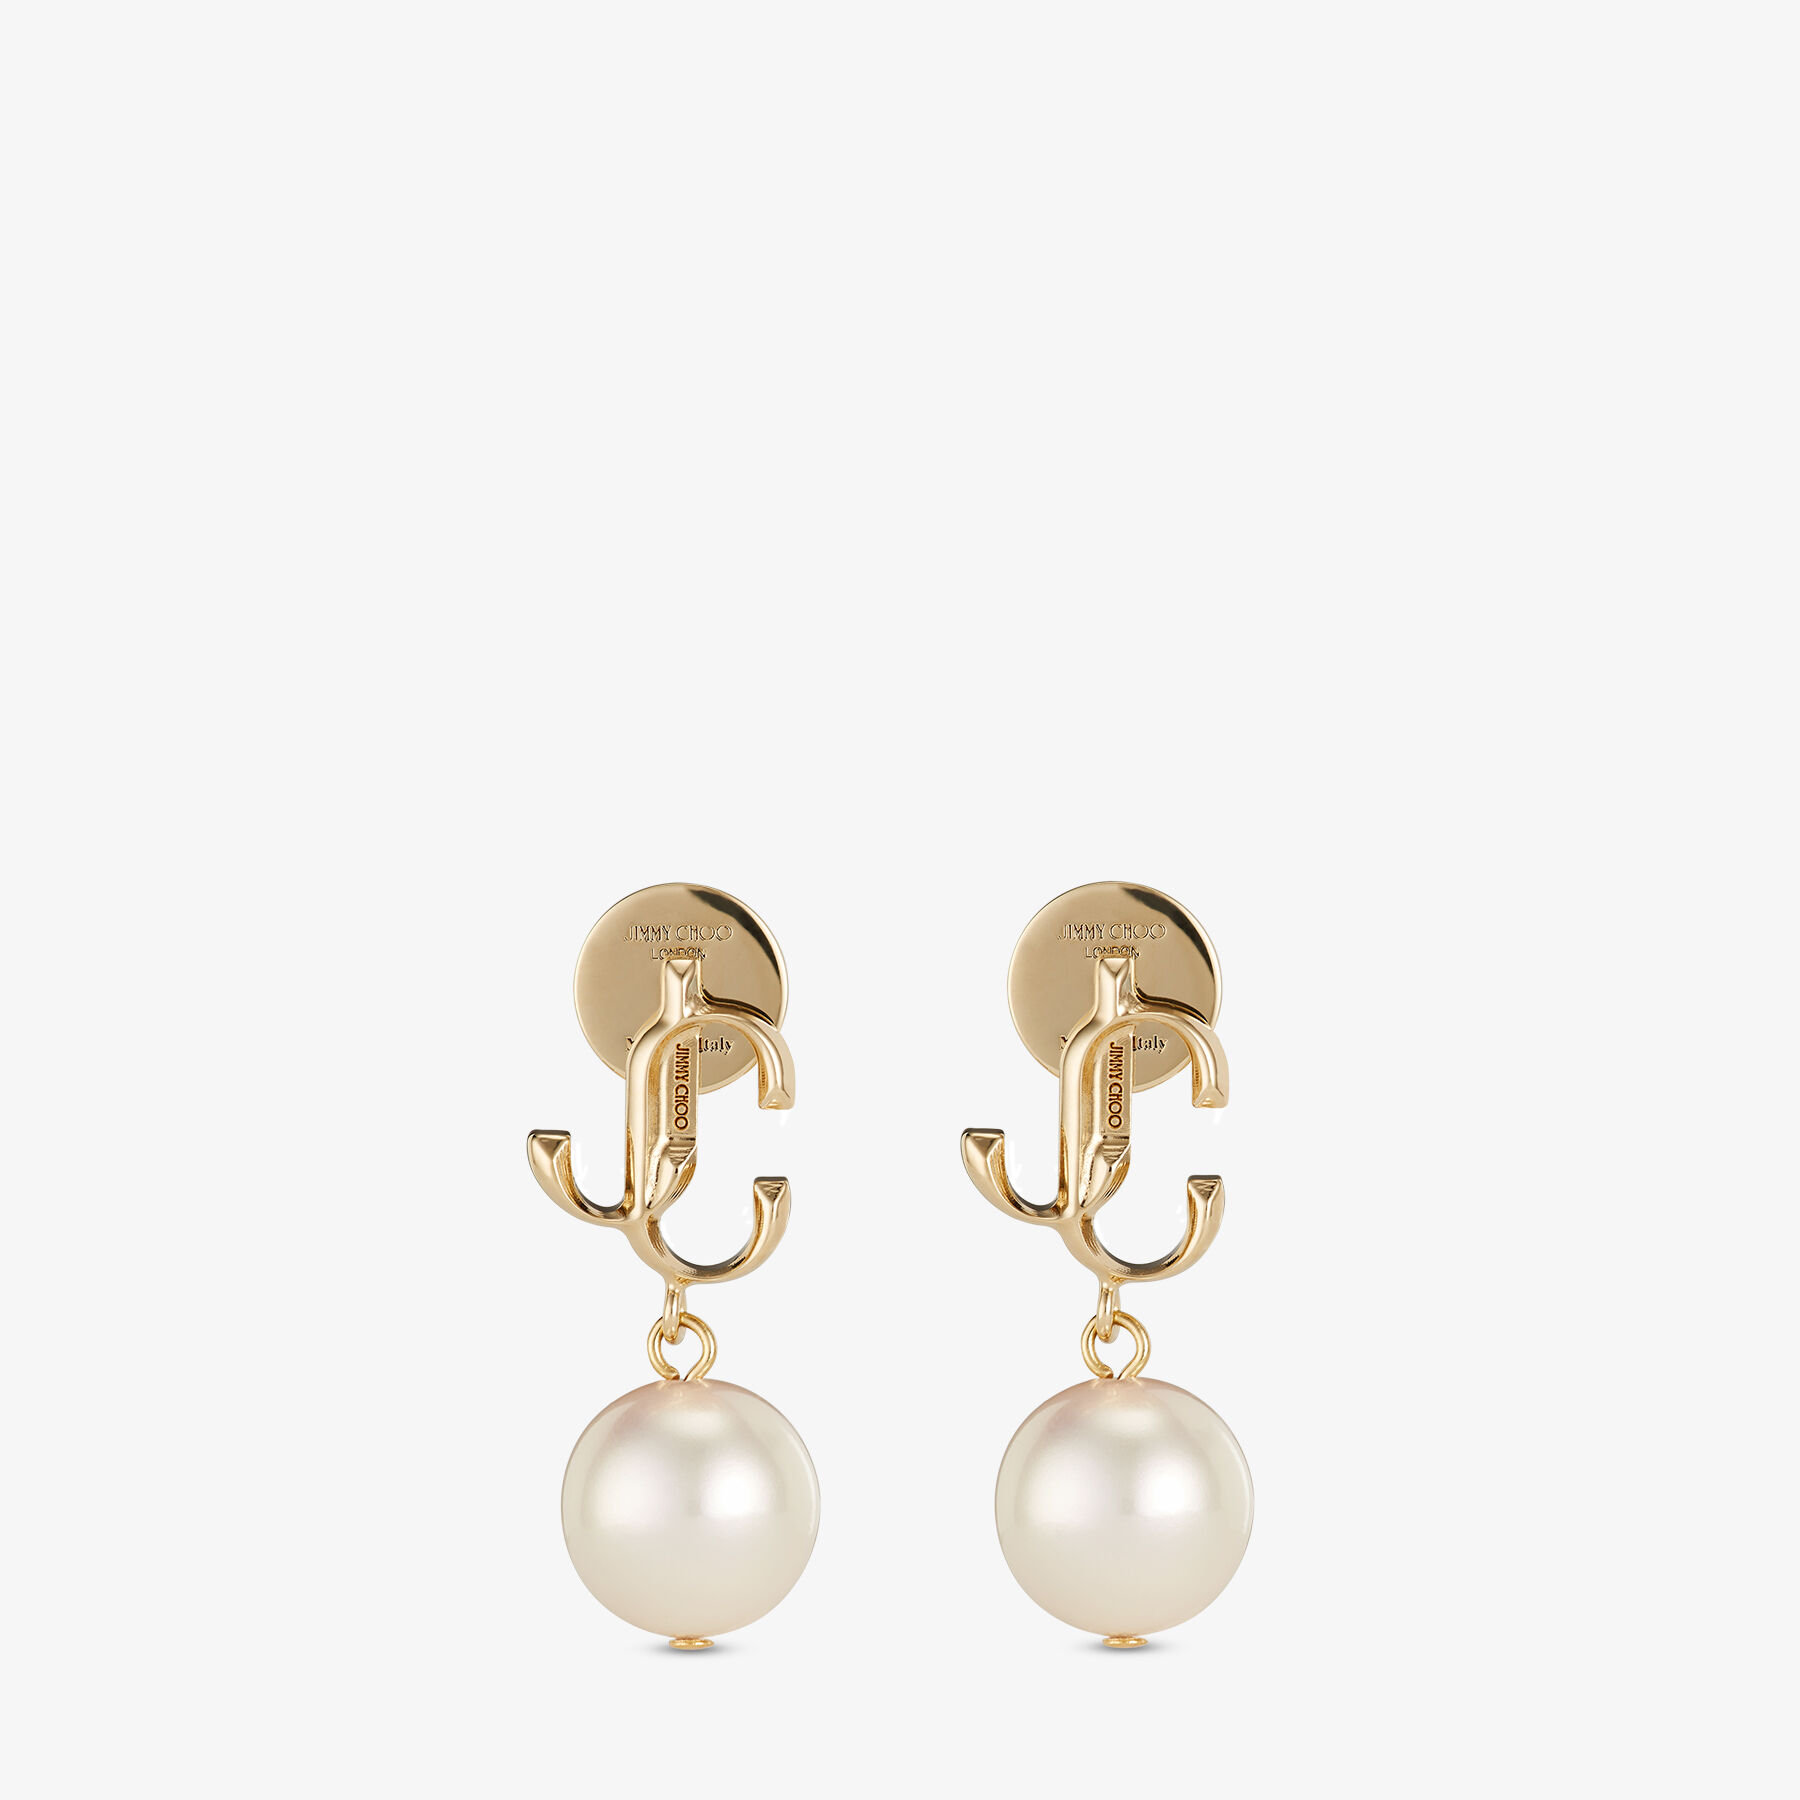 Abstract earring stud N°1 in gold plated silver – AgJc